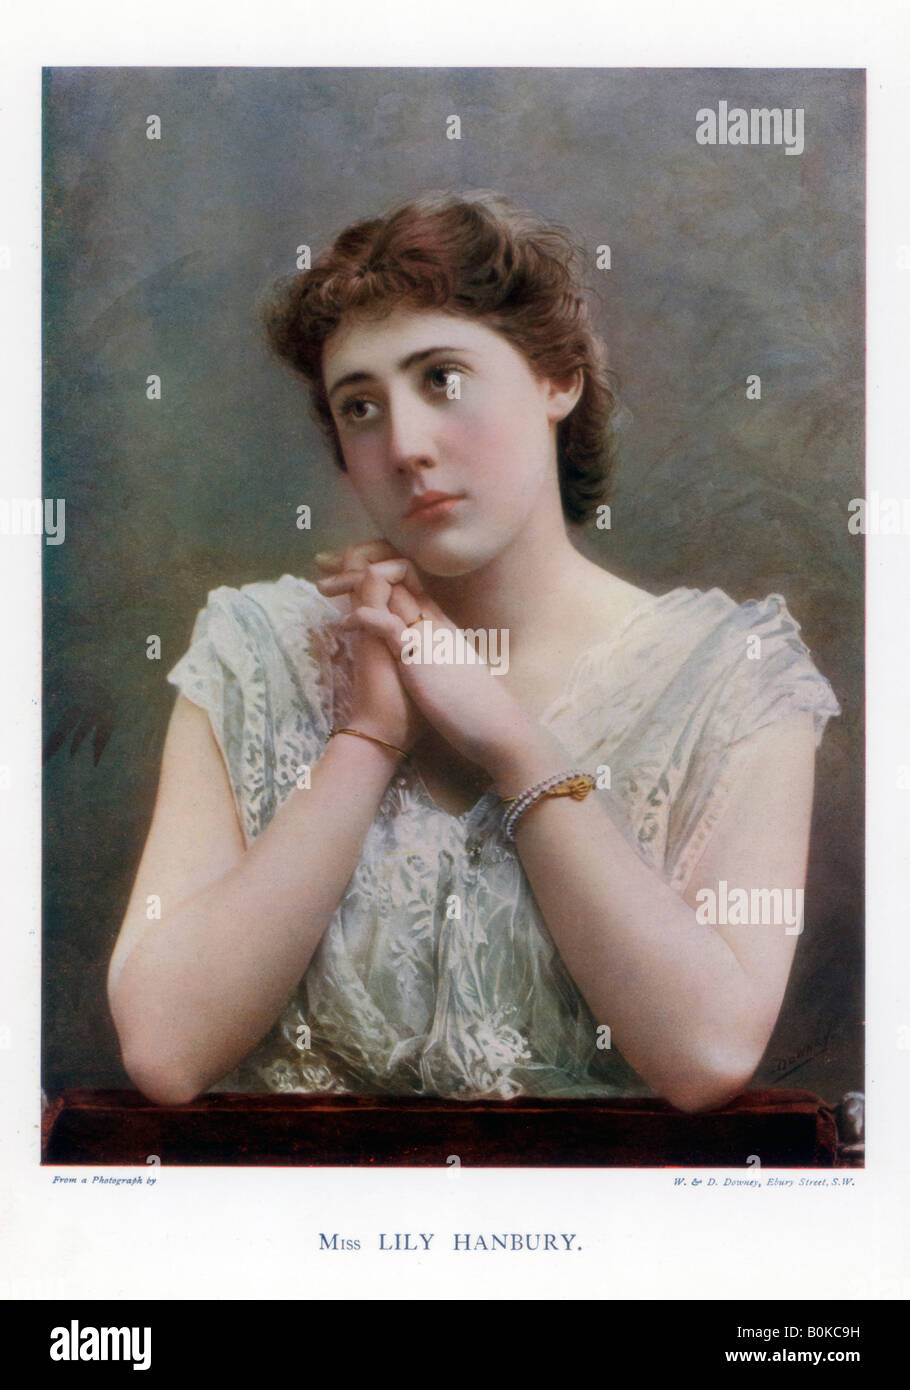 Lily Hanbury, English stage actress, 1901.Artist: W&D Downey Stock Photo